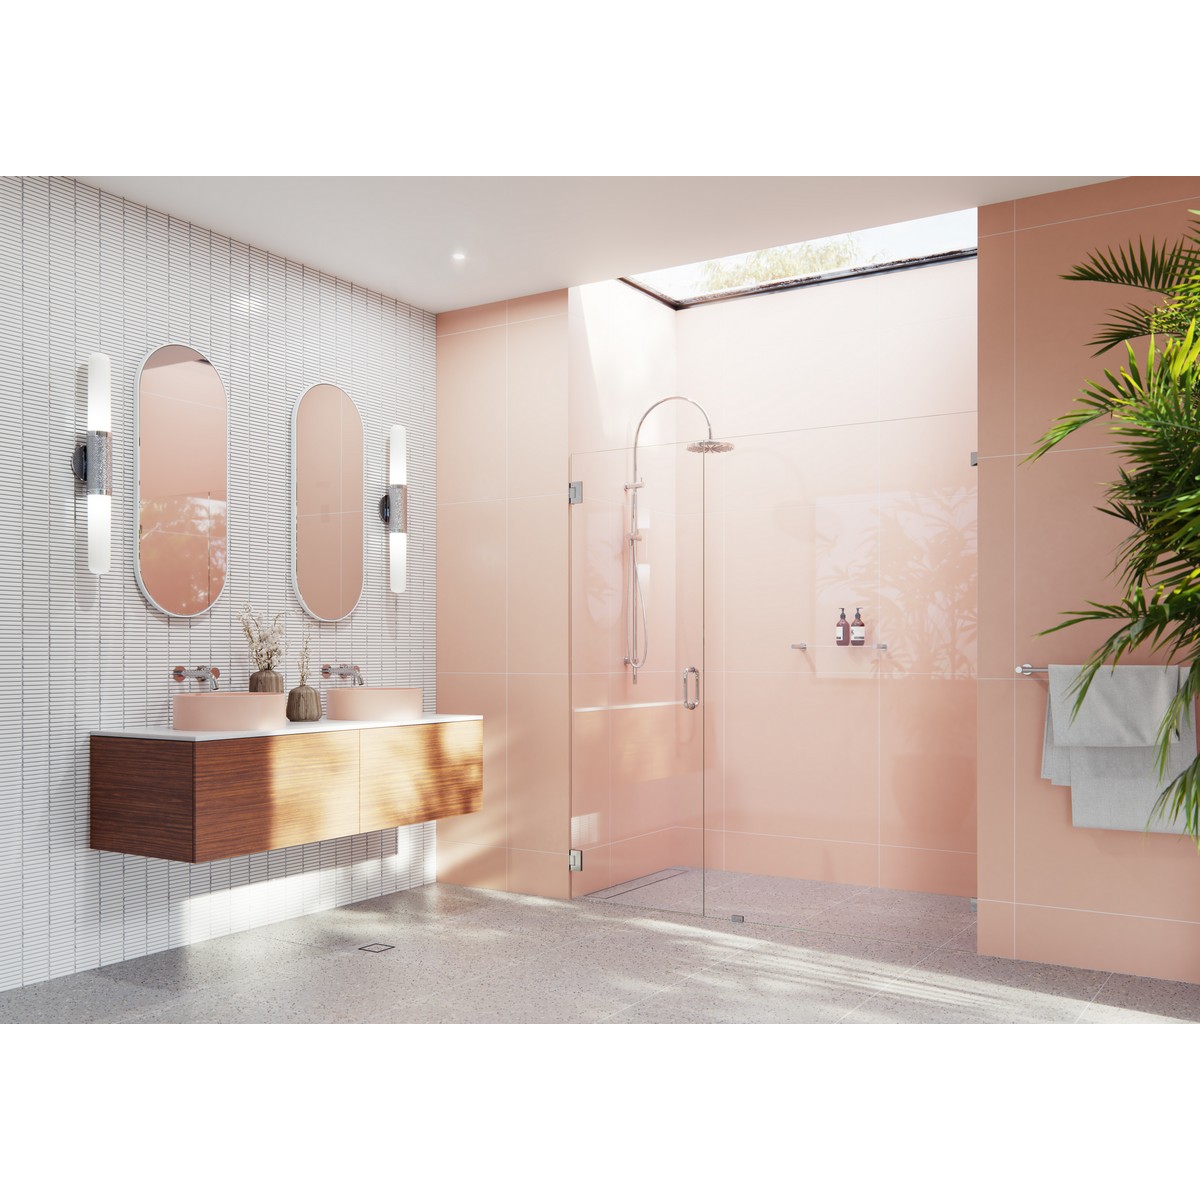 GLASS WAREHOUSE GW-WH-71 ILLUME 71 W X 78 H WALL HINGED FULLY FRAMELESS GLASS SHOWER ENCLOSURE